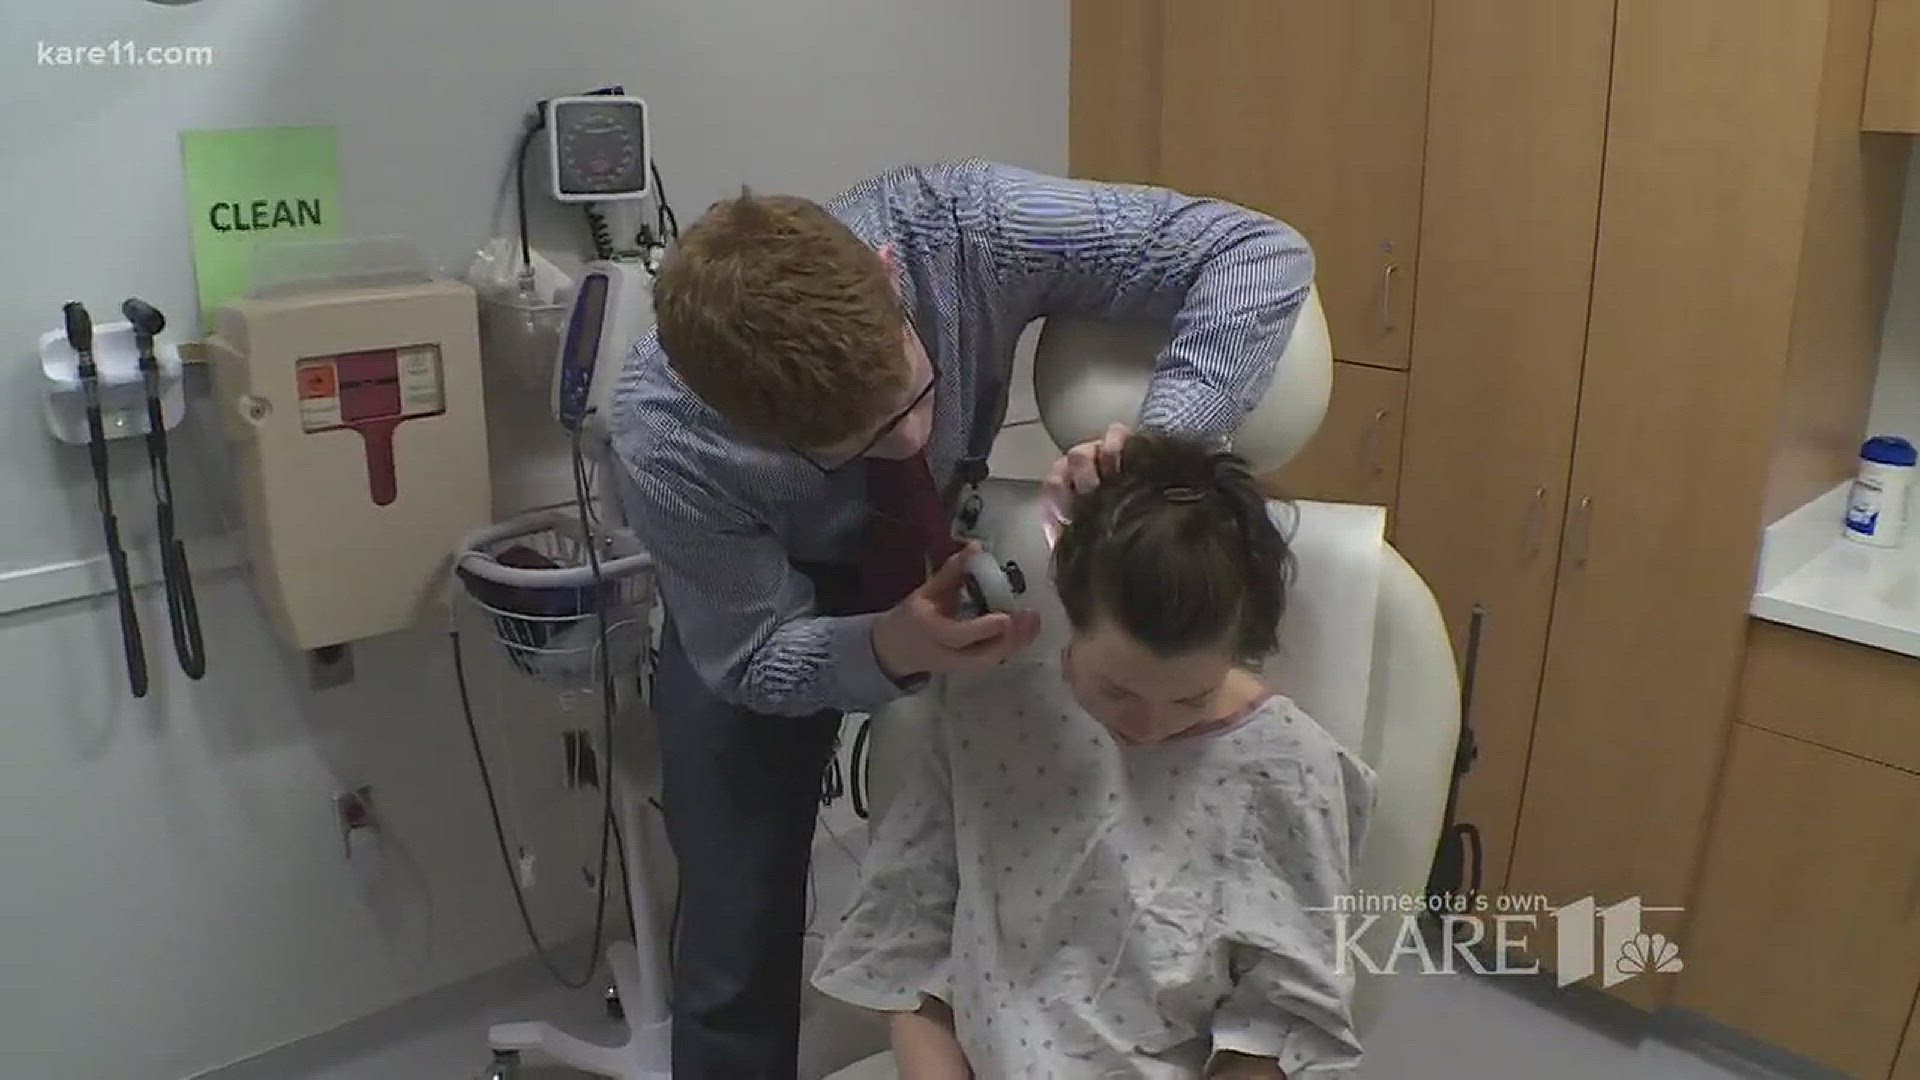 Dermatologists were giving free skin cancer screenings at the U of M Health for "Melanoma Monday," an event created to raise awareness about skin cancer and promote regular skin exams. https://kare11.tv/2jFYIut